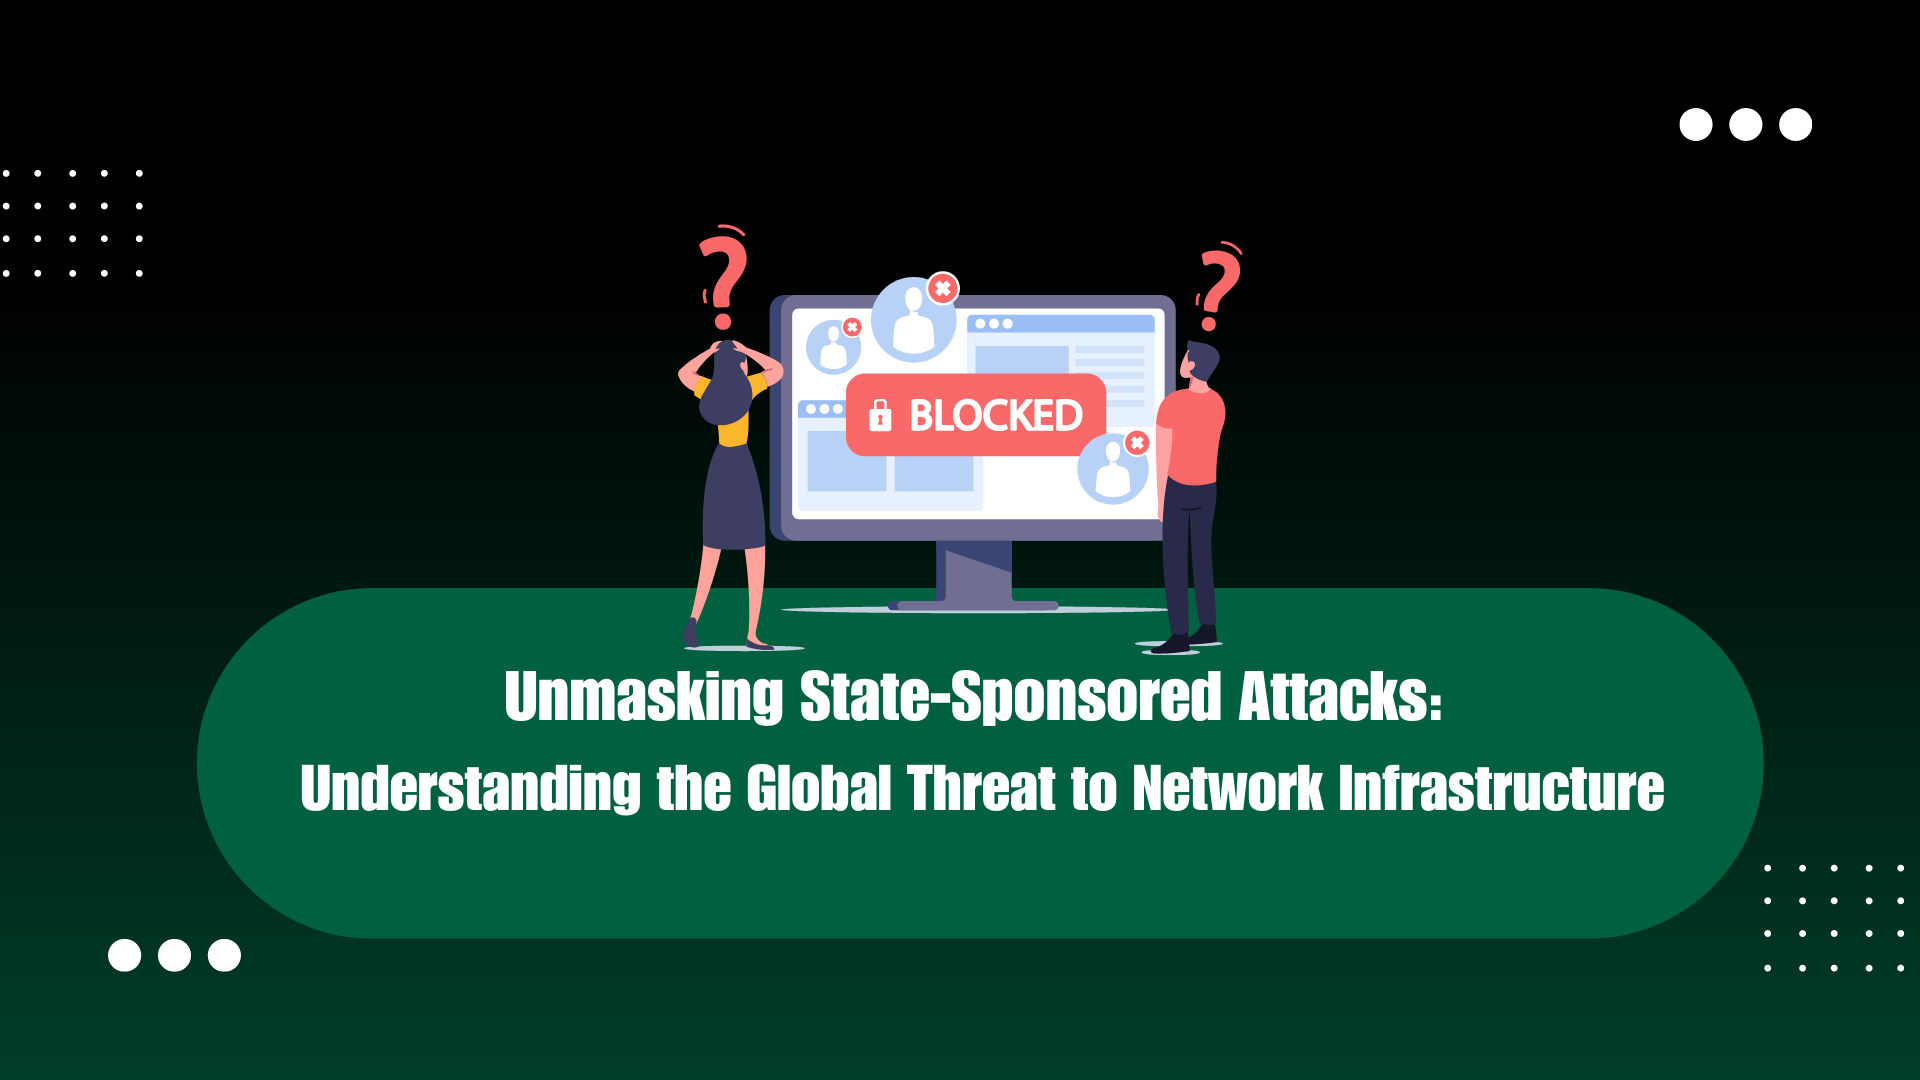 Unmasking State-Sponsored Attacks Understanding the Global Threat to Network Infrastructure